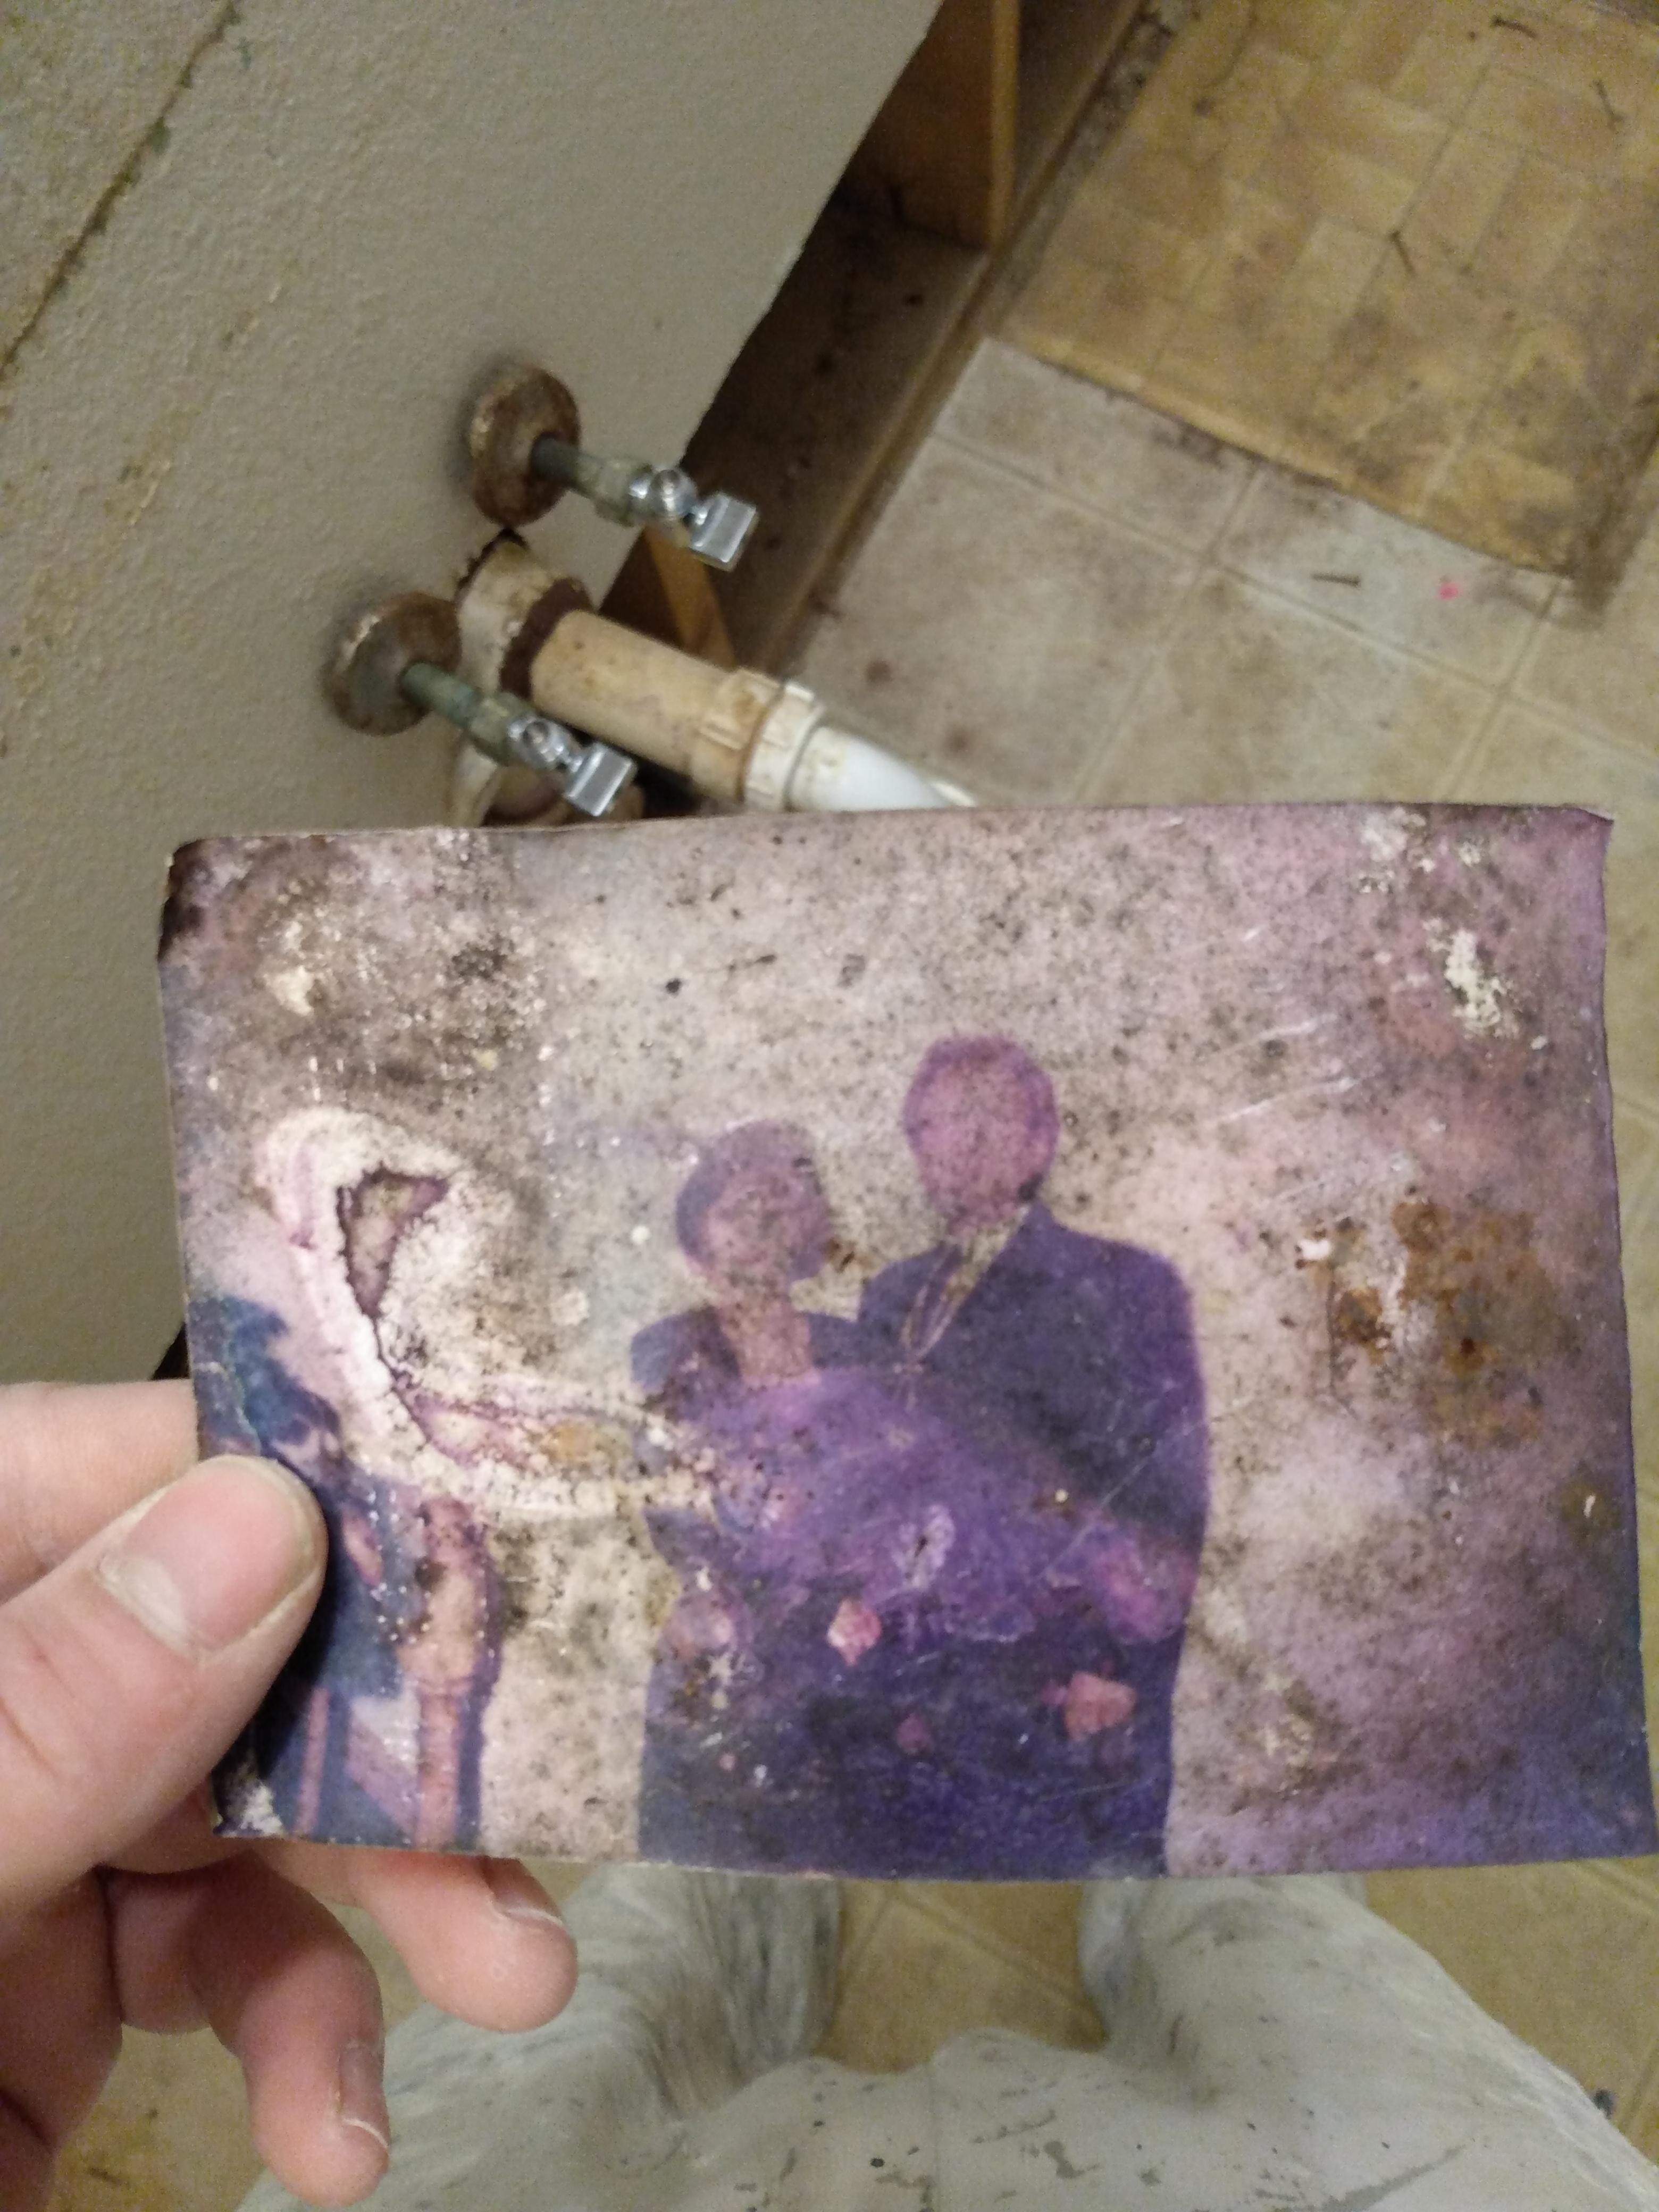 someone holding a damaged old photo of what looks like a couple